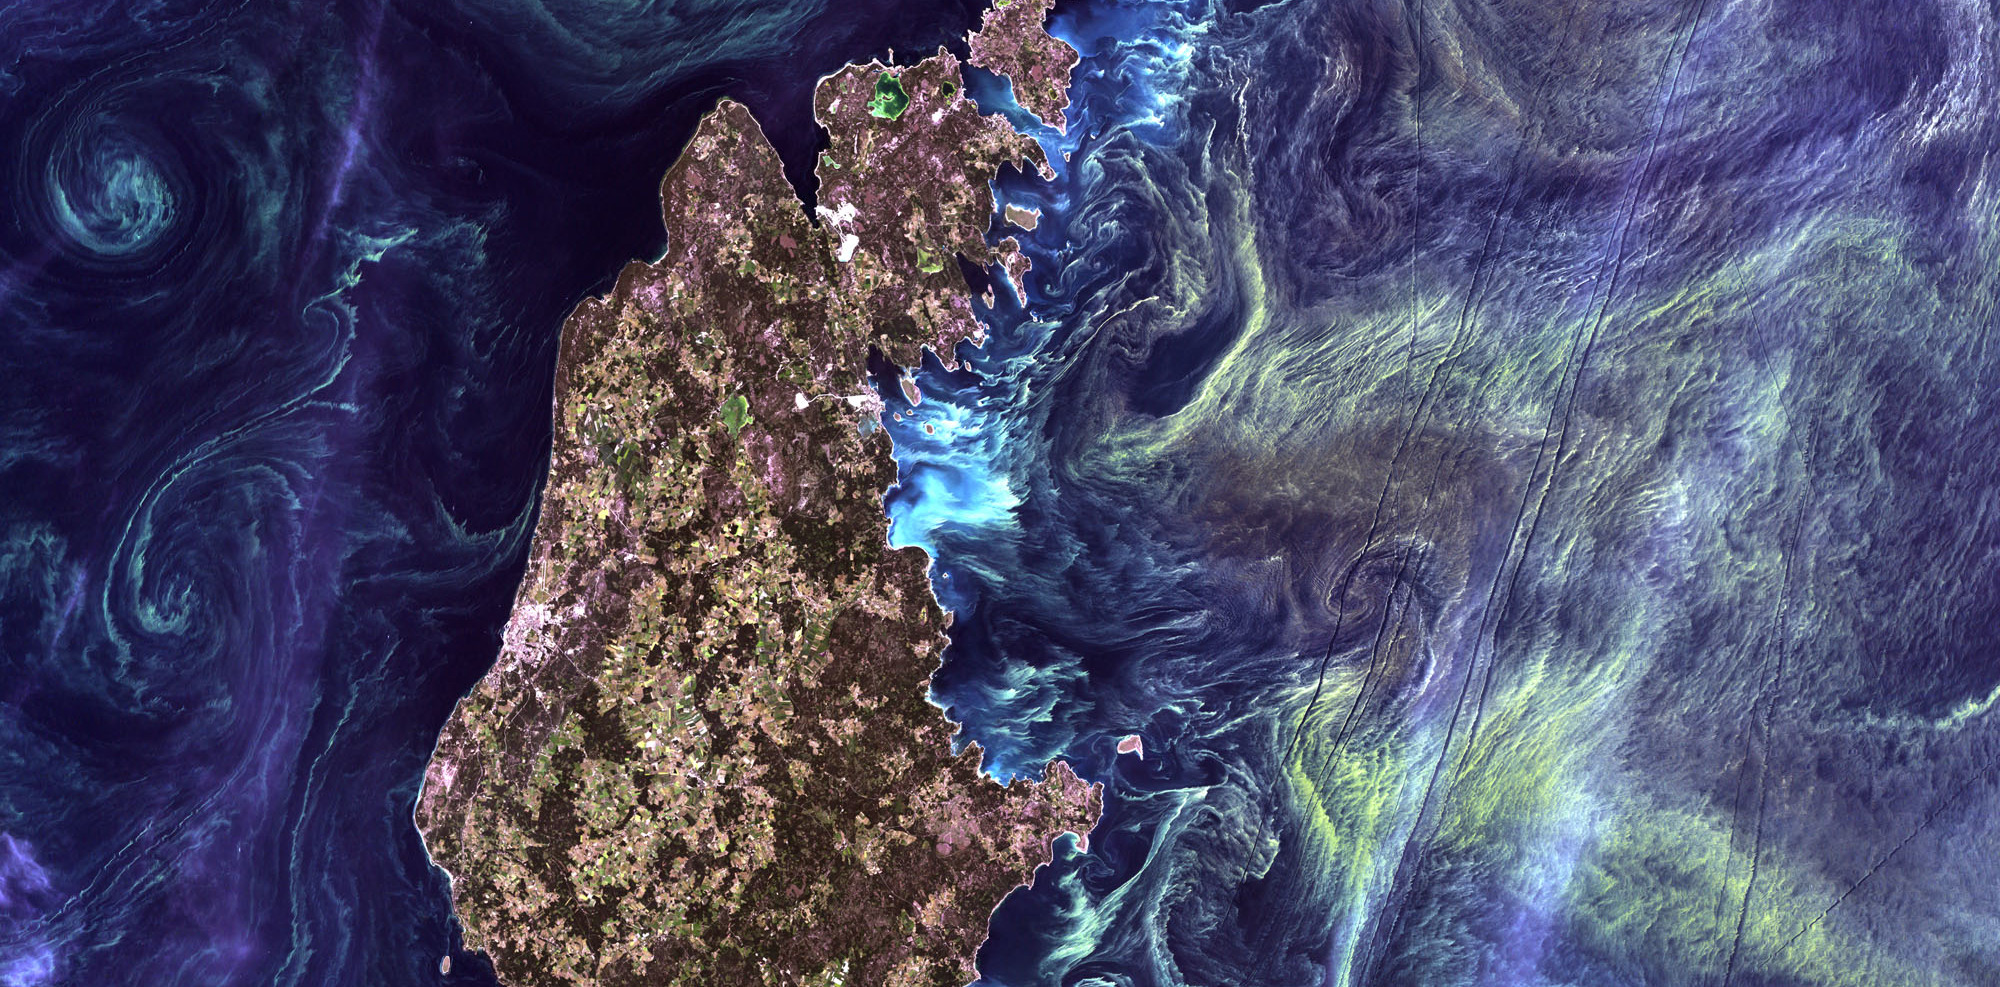 Phytoplankton blooms swirl around the magnificant Silurian rocks of Gotland